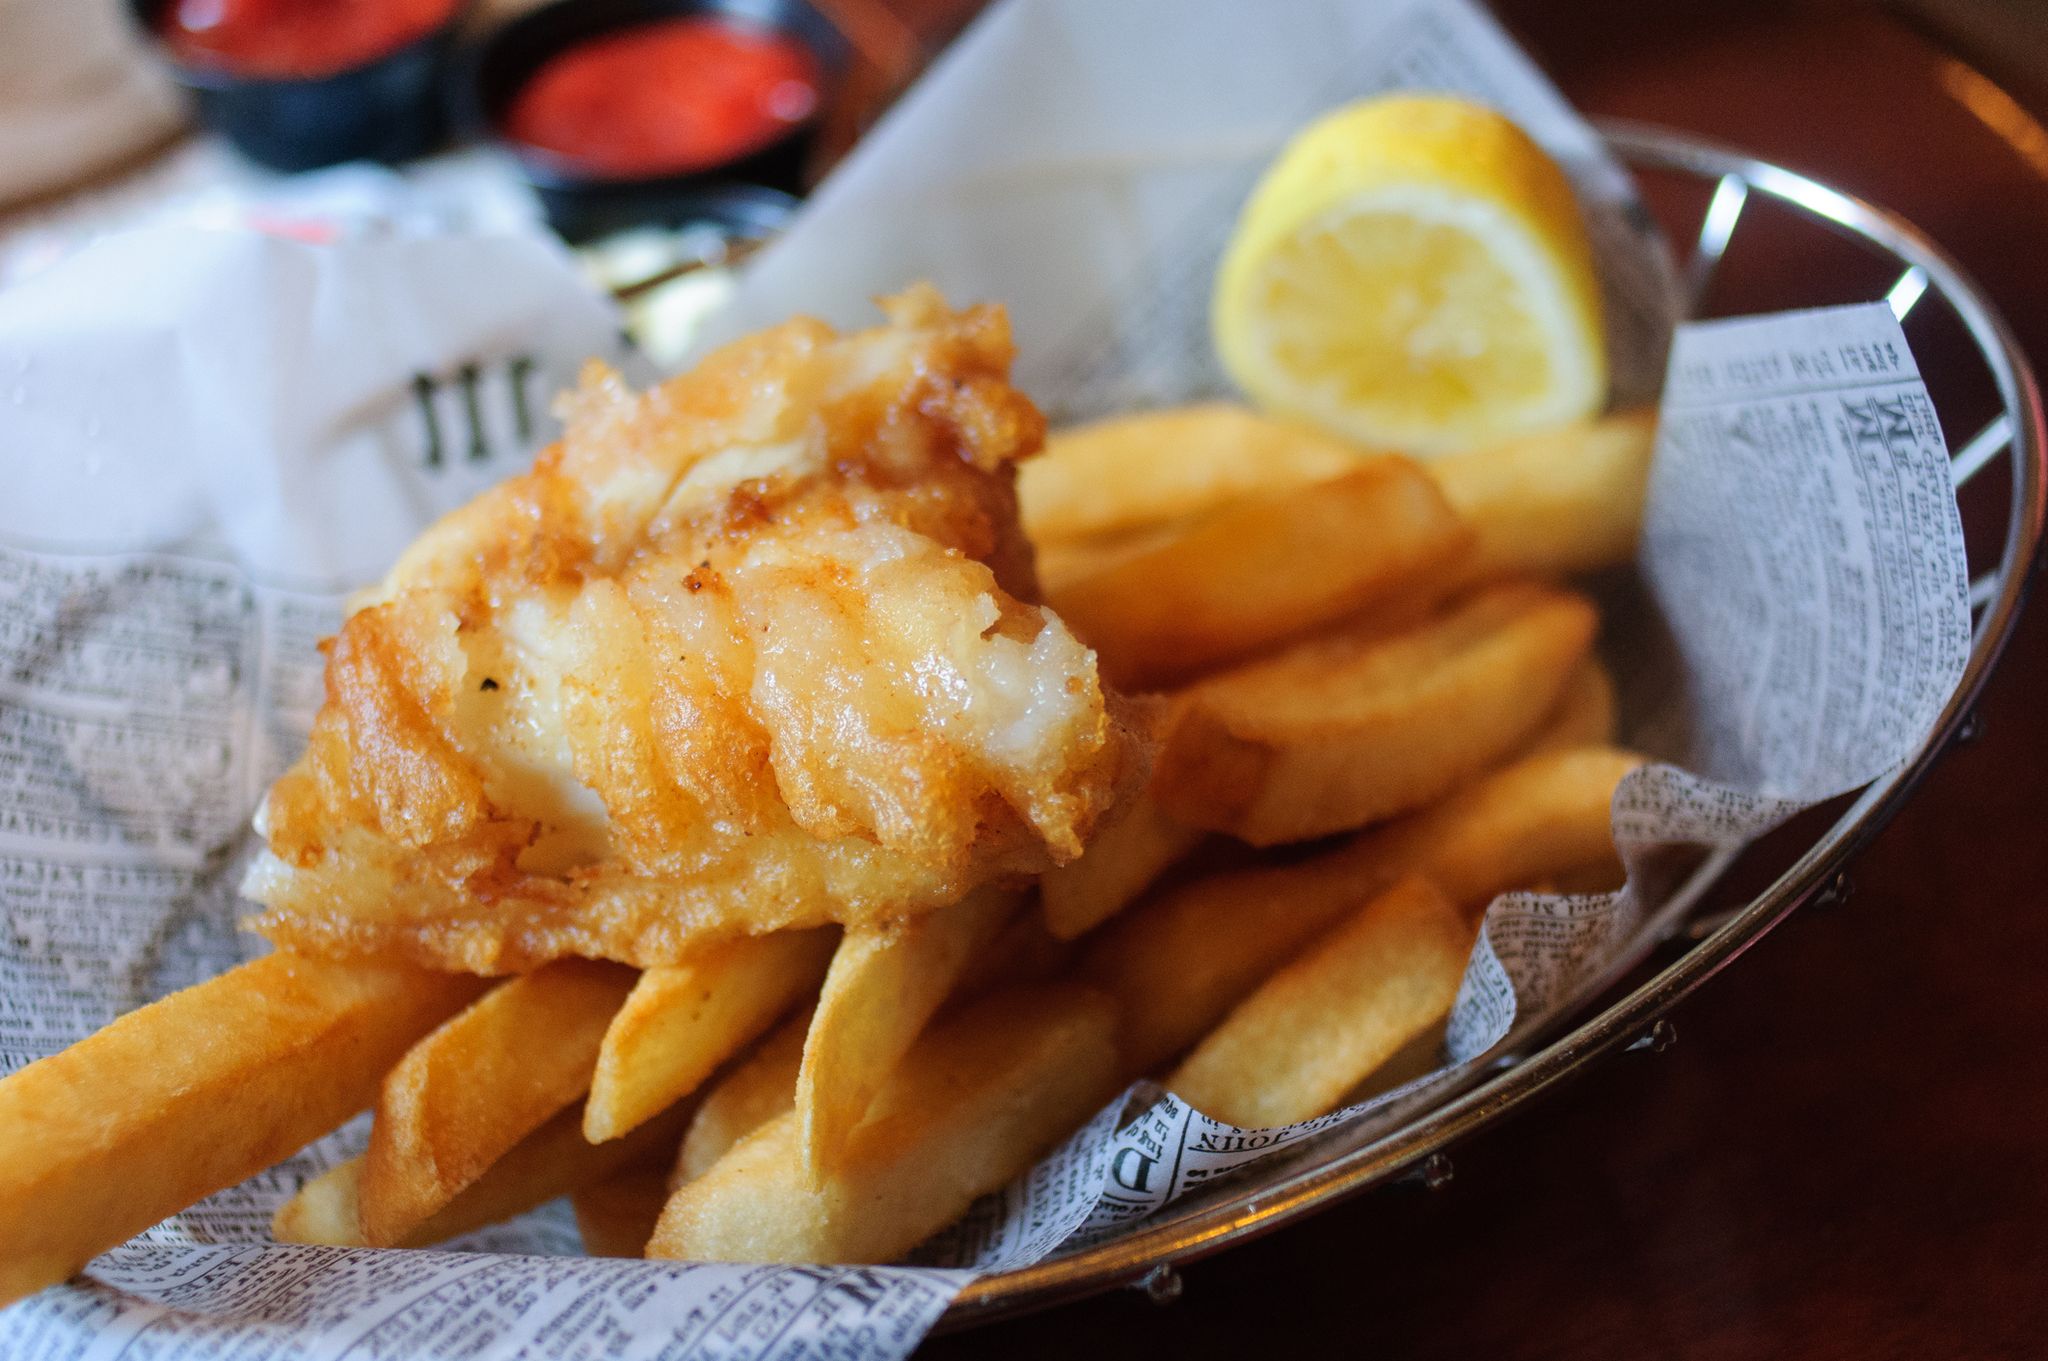 Fish and chips in a basket with a lemon